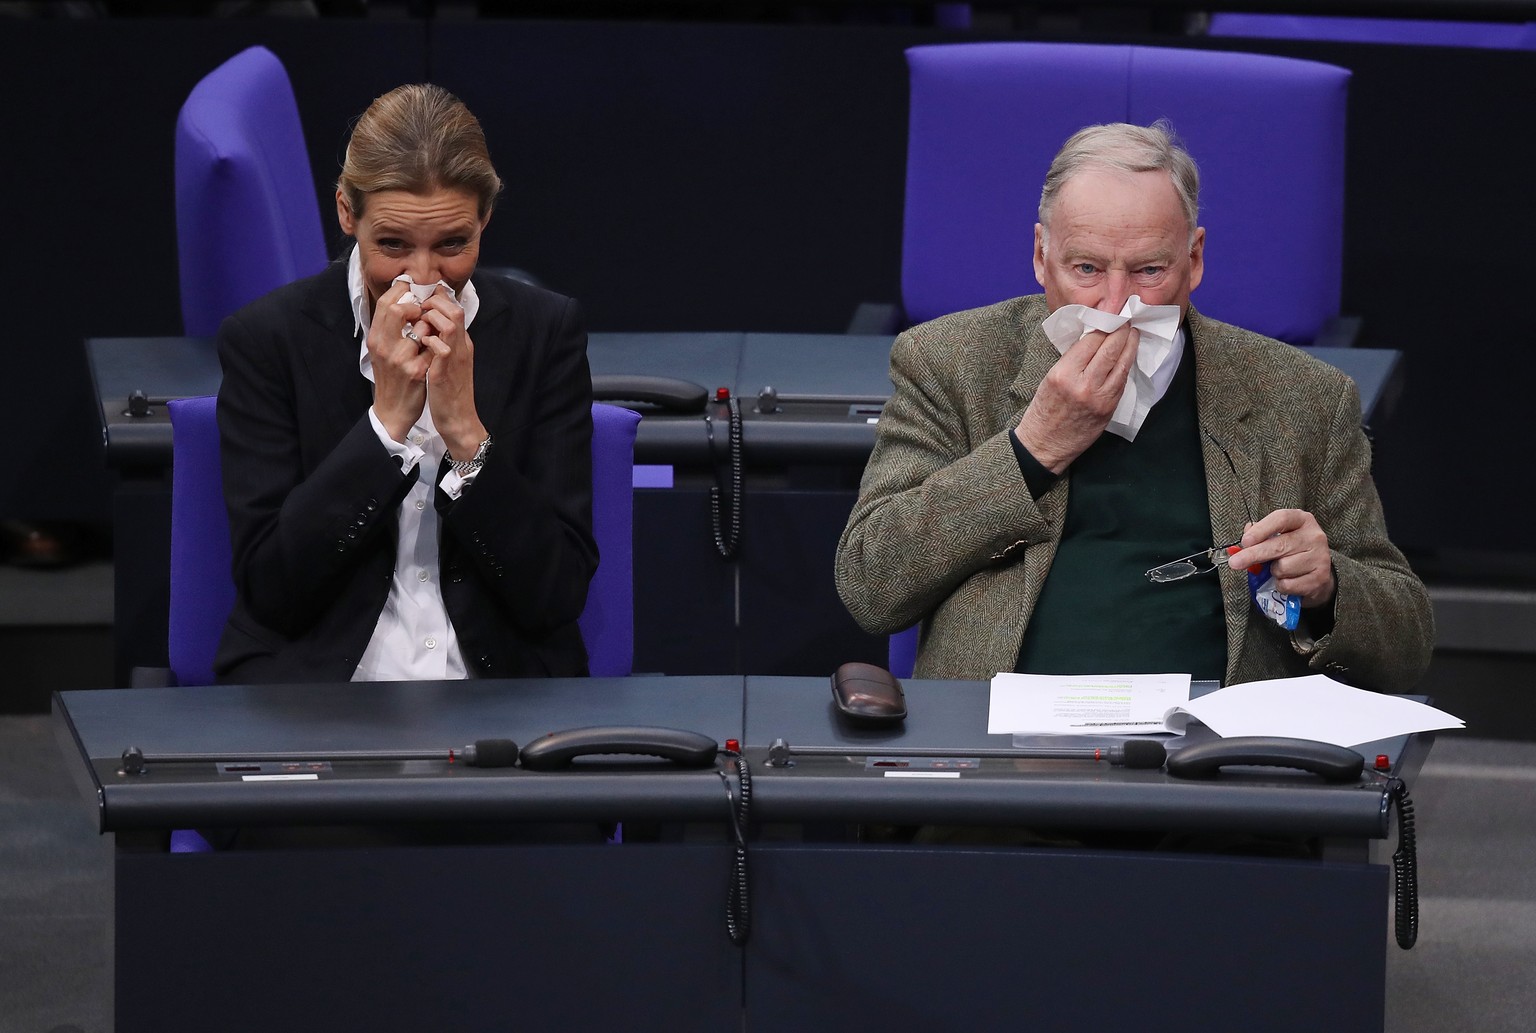 BERLIN, GERMANY - MARCH 14: Alice Weidel and Alexander Gauland, Bundestag faction leaders of the right-wing Alternative for Germany (AfD) political party, blow their noses shortly before German Chance ...